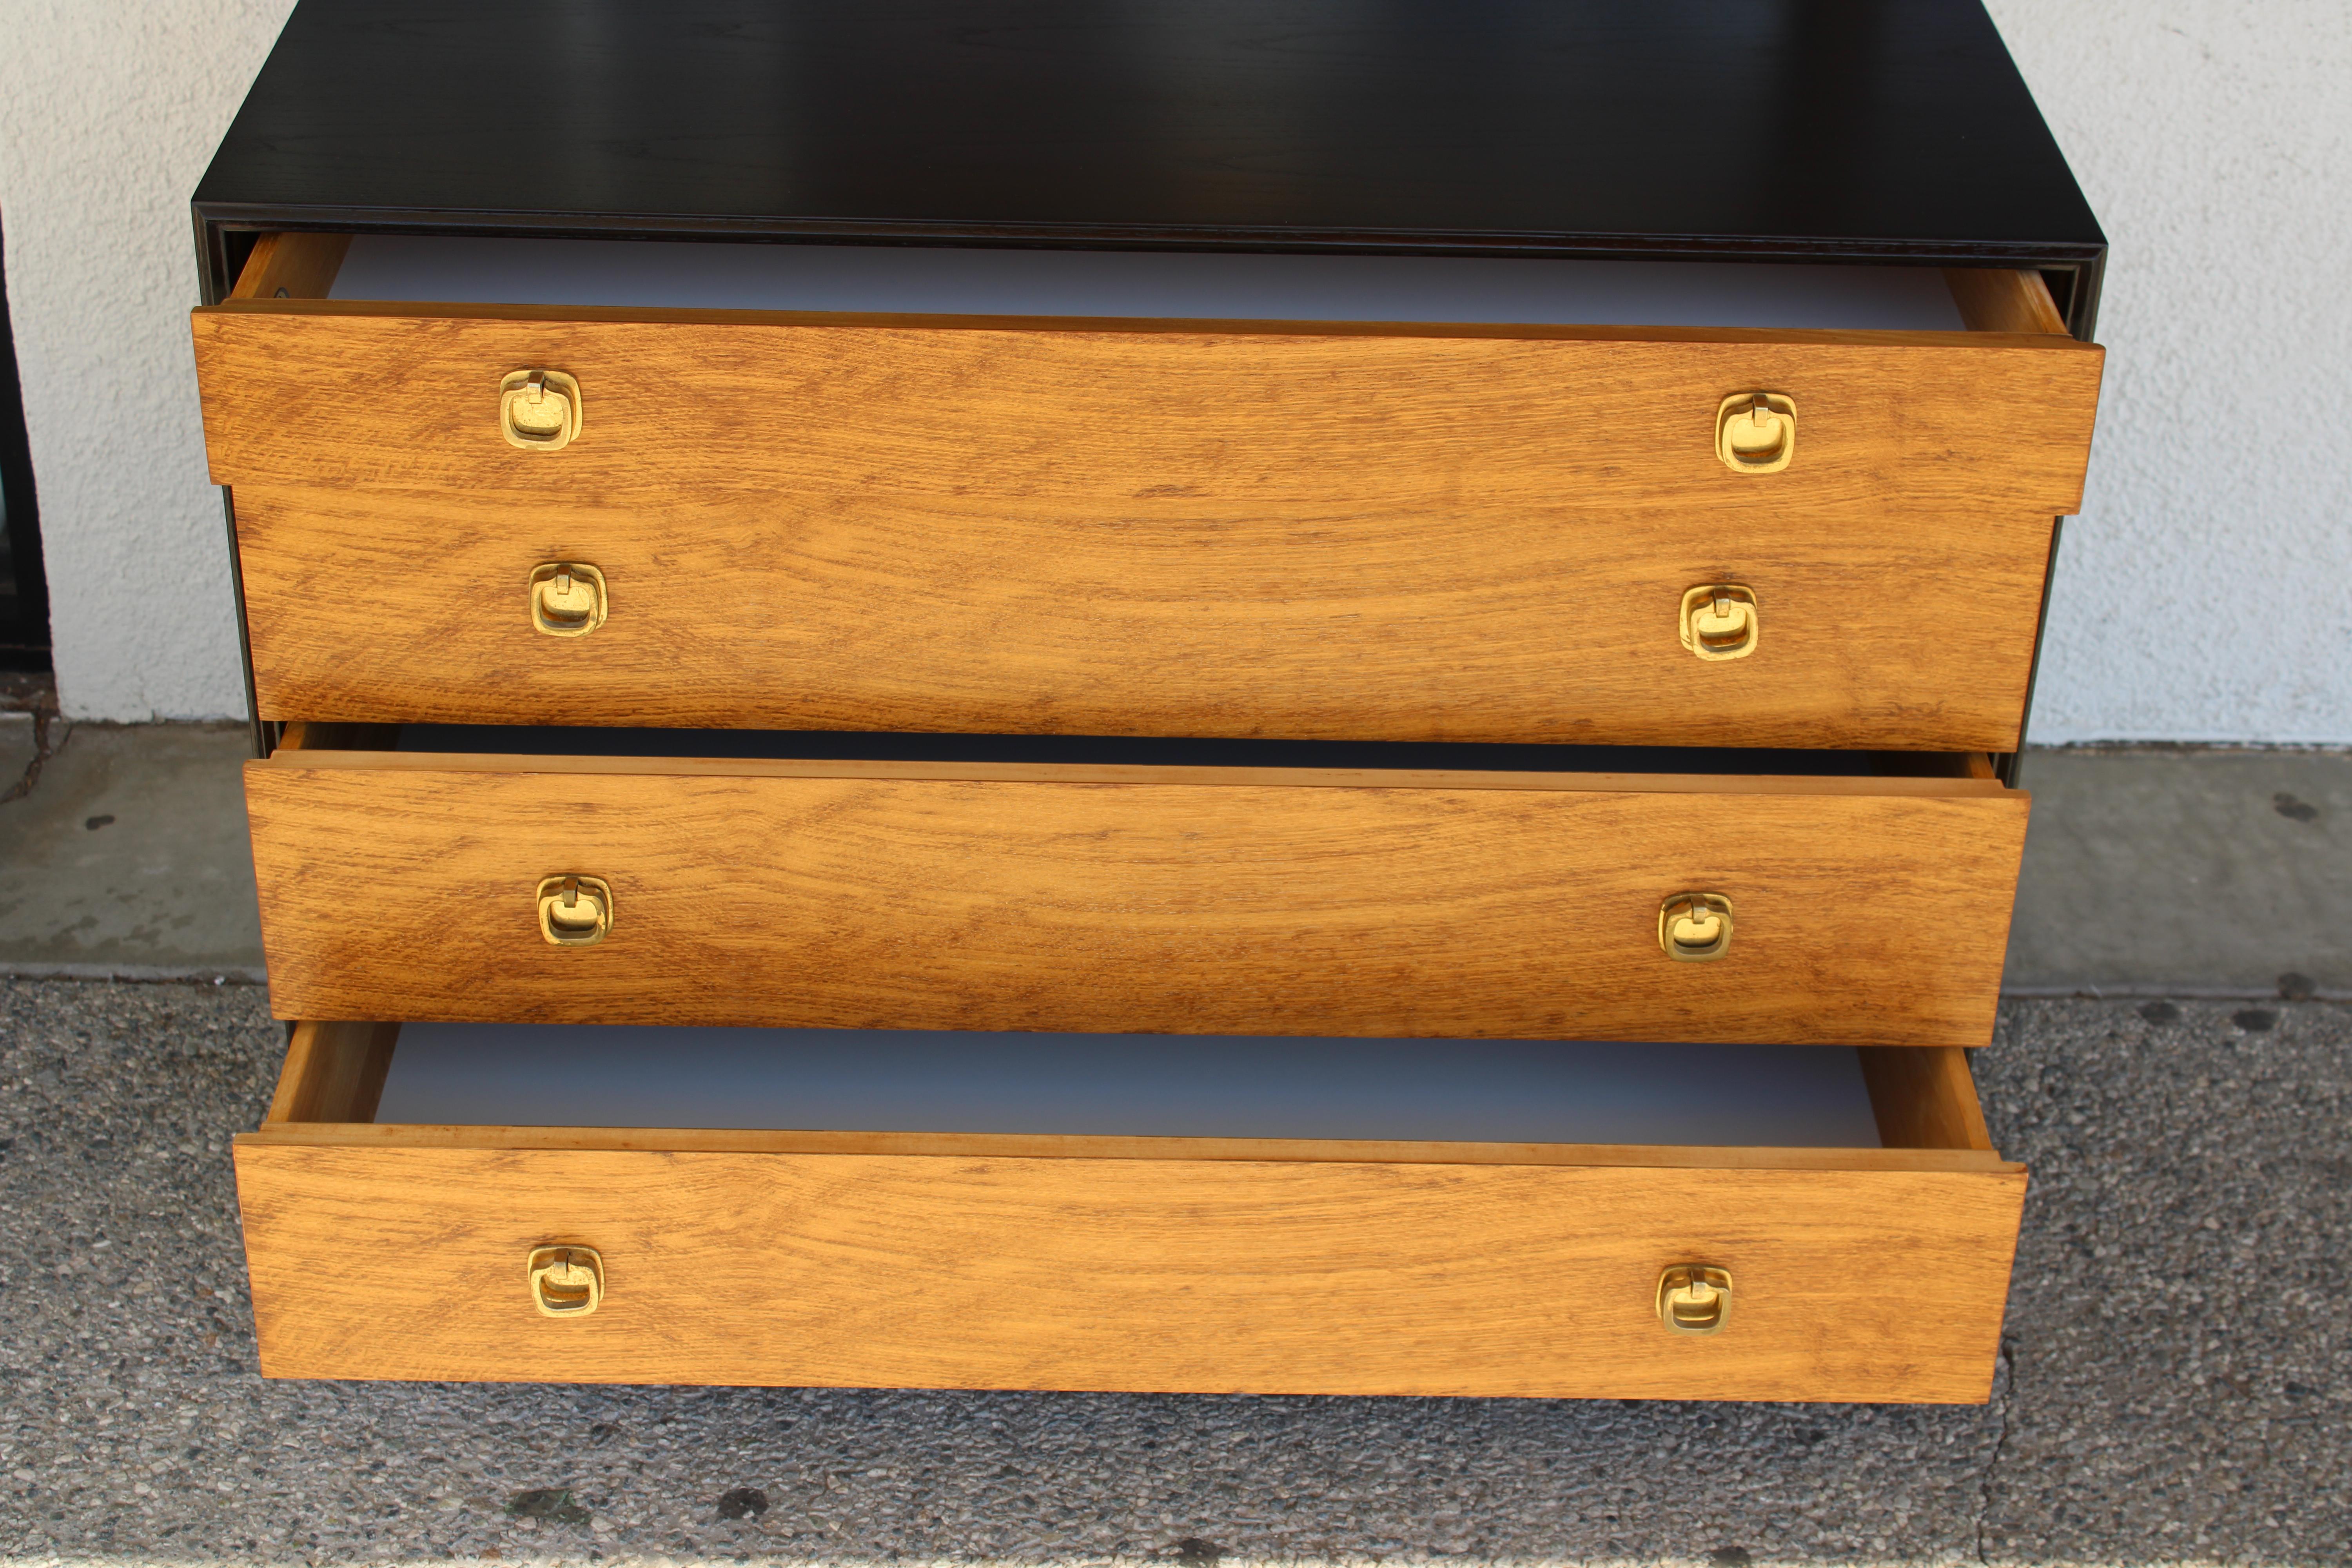 Pair of Dressers by Edward Wormley for Dunbar, Berne Indiana 1